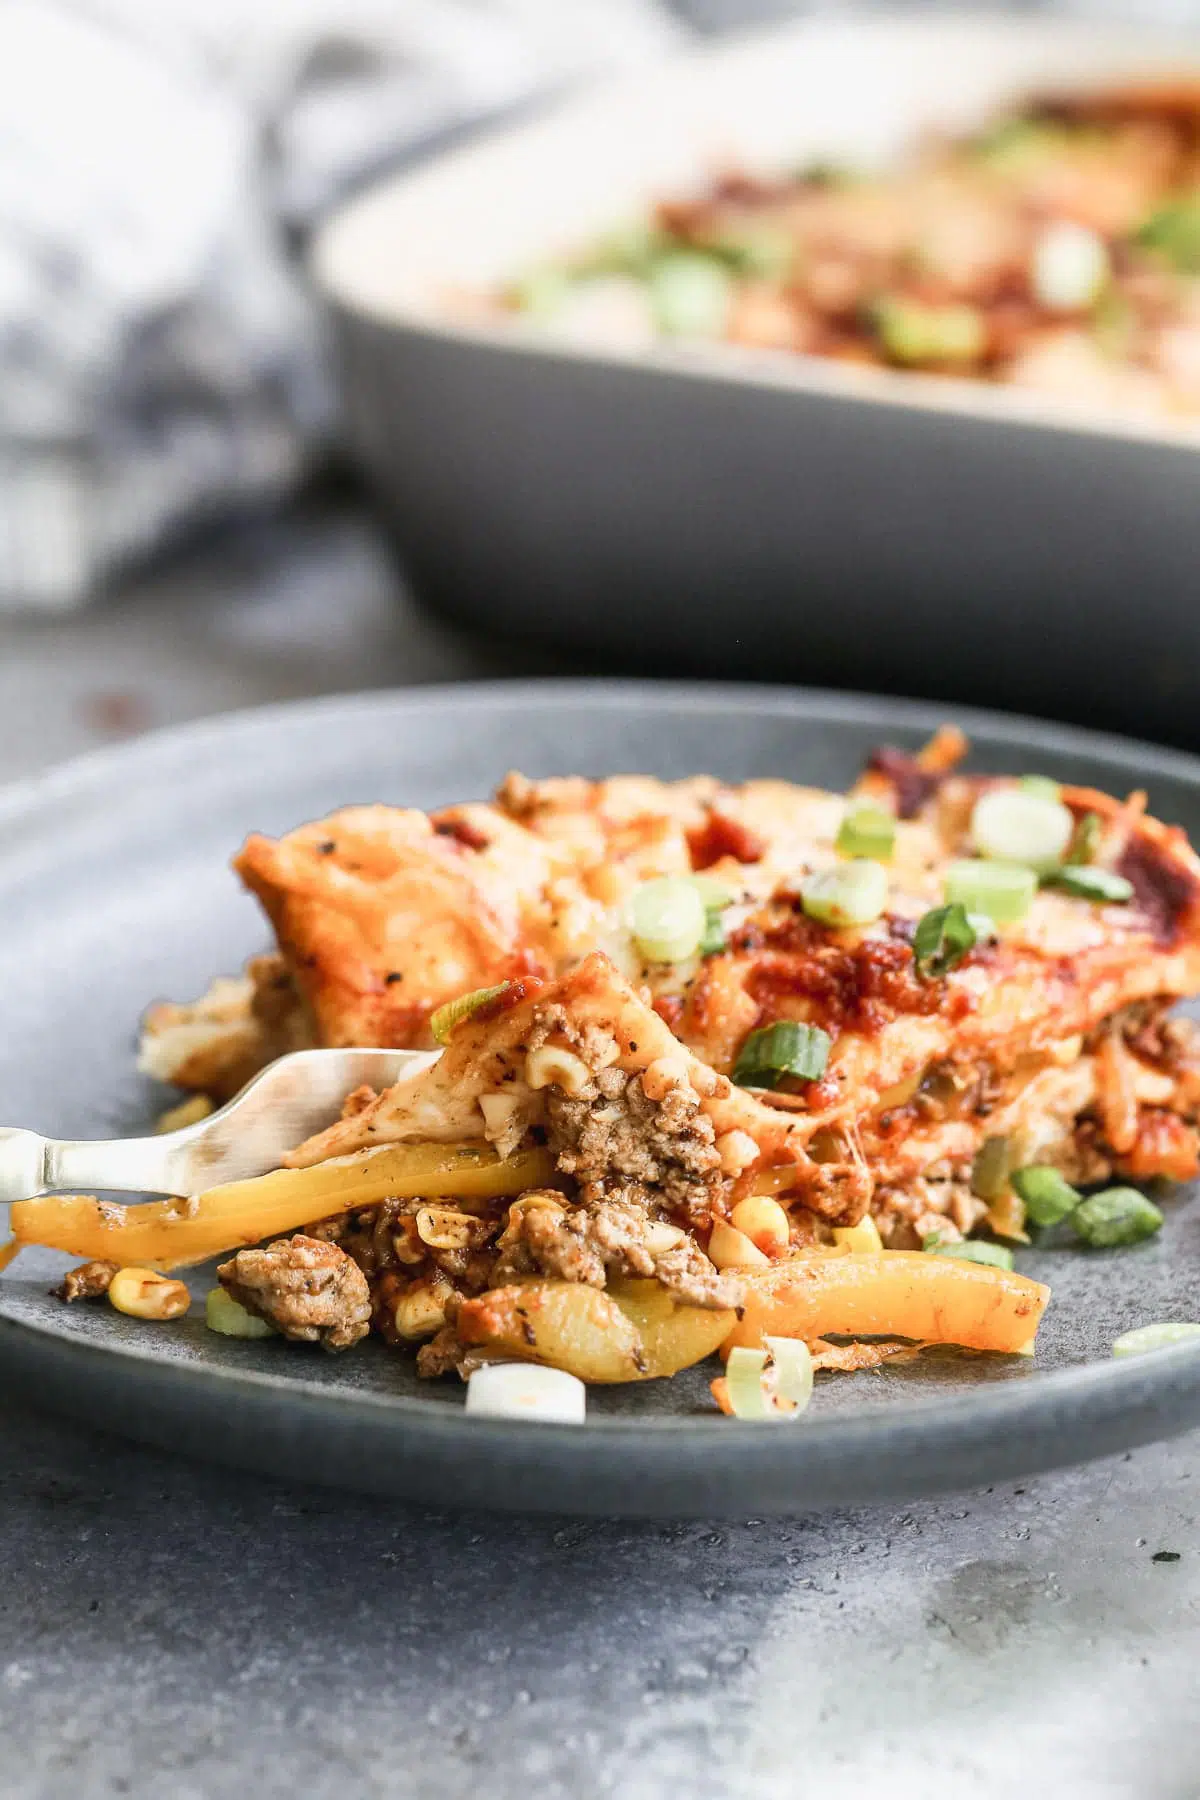 Packed with ground chicken or turkey, plenty of veggies, and an easy homemade enchilada sauce, our Chicken Enchilada Casserole is the perfect way to get your enchilada fix in an easier form. Make a day in advance and pop in the oven when you're ready to eat.&nbsp;